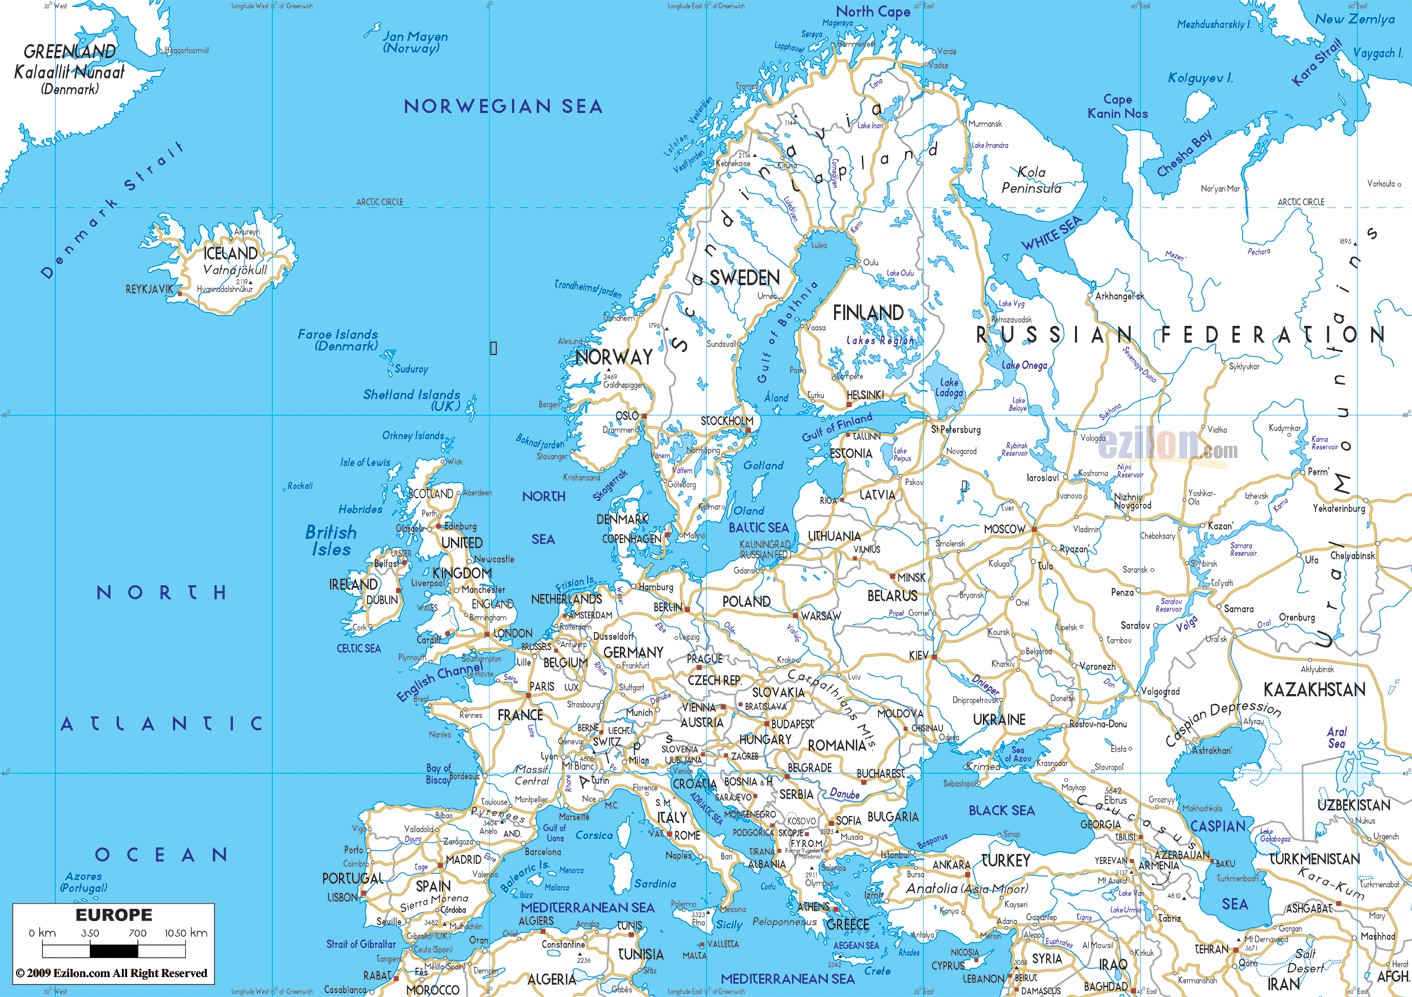 Maps of Europe | Map of Europe in English | Political, Administrative